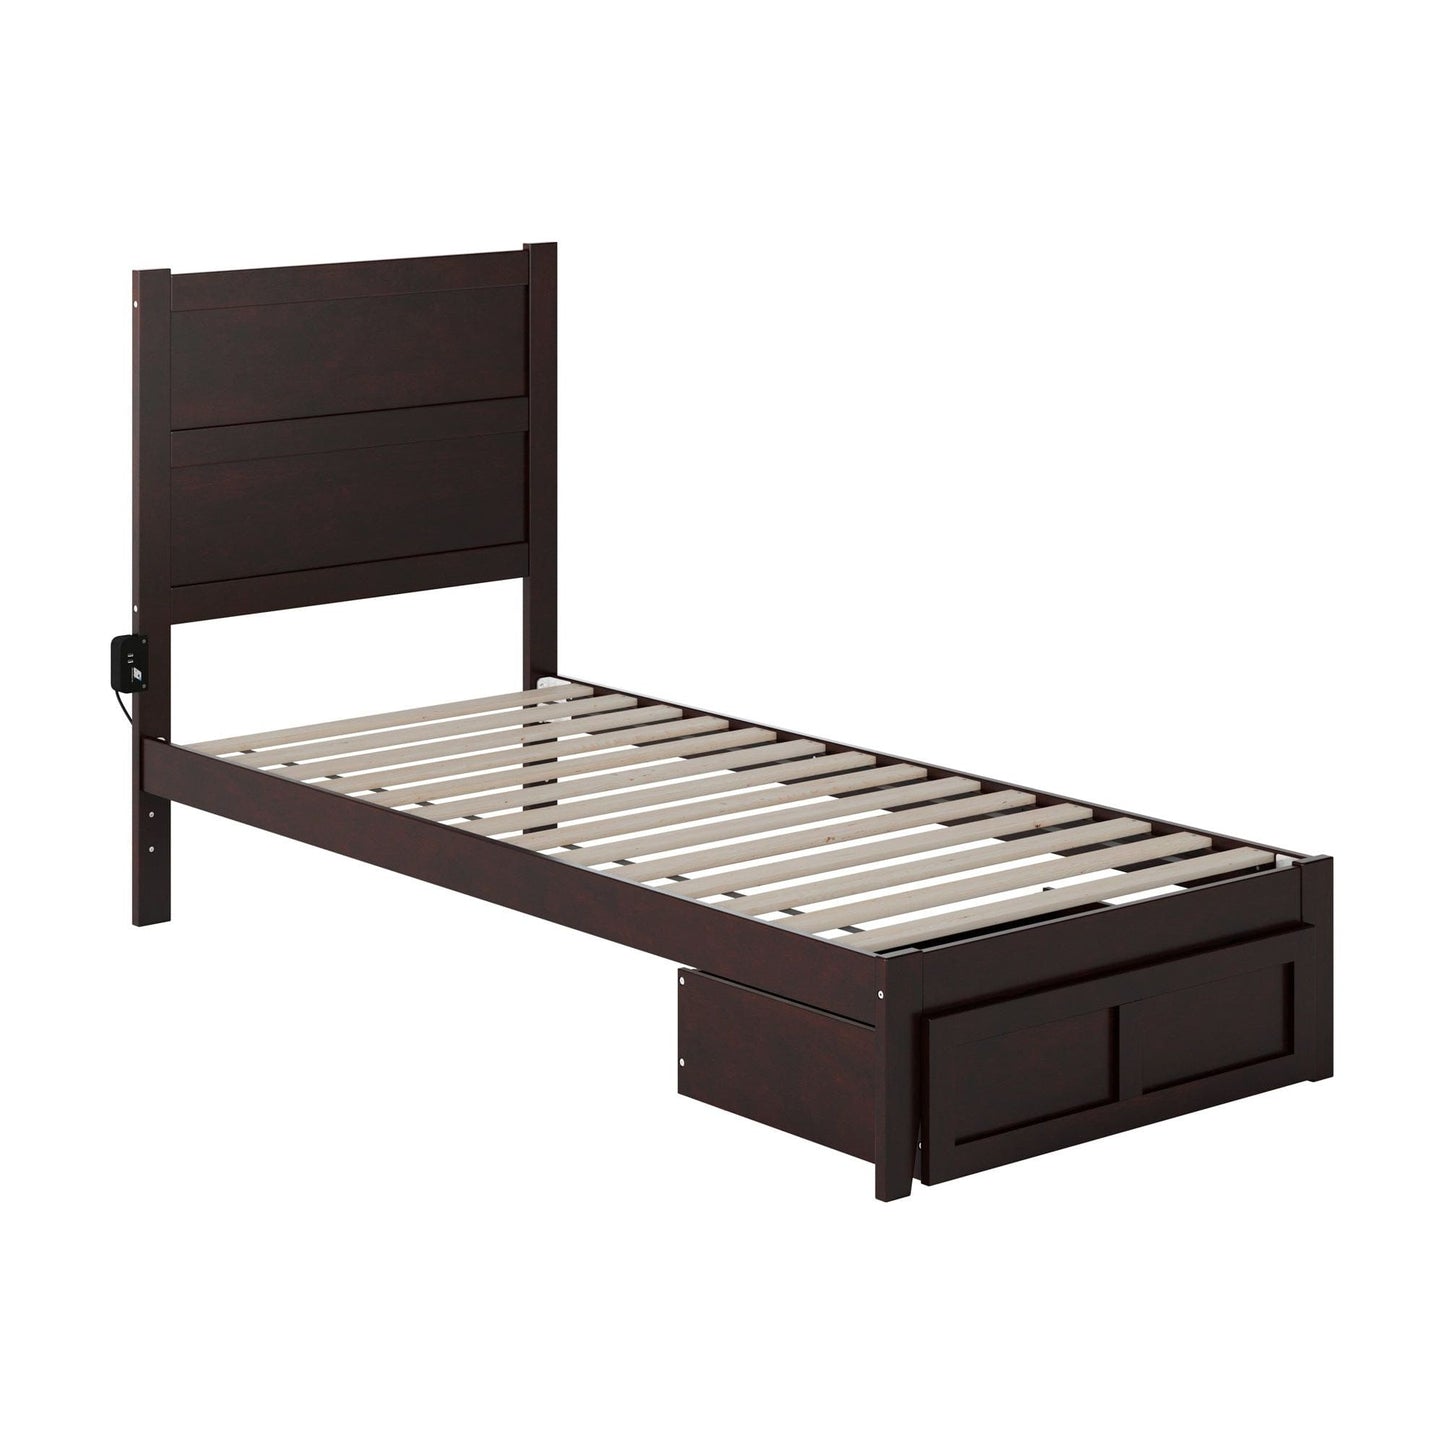 AFI Furnishings NoHo Twin Extra Long Bed with Foot Drawer in Espresso